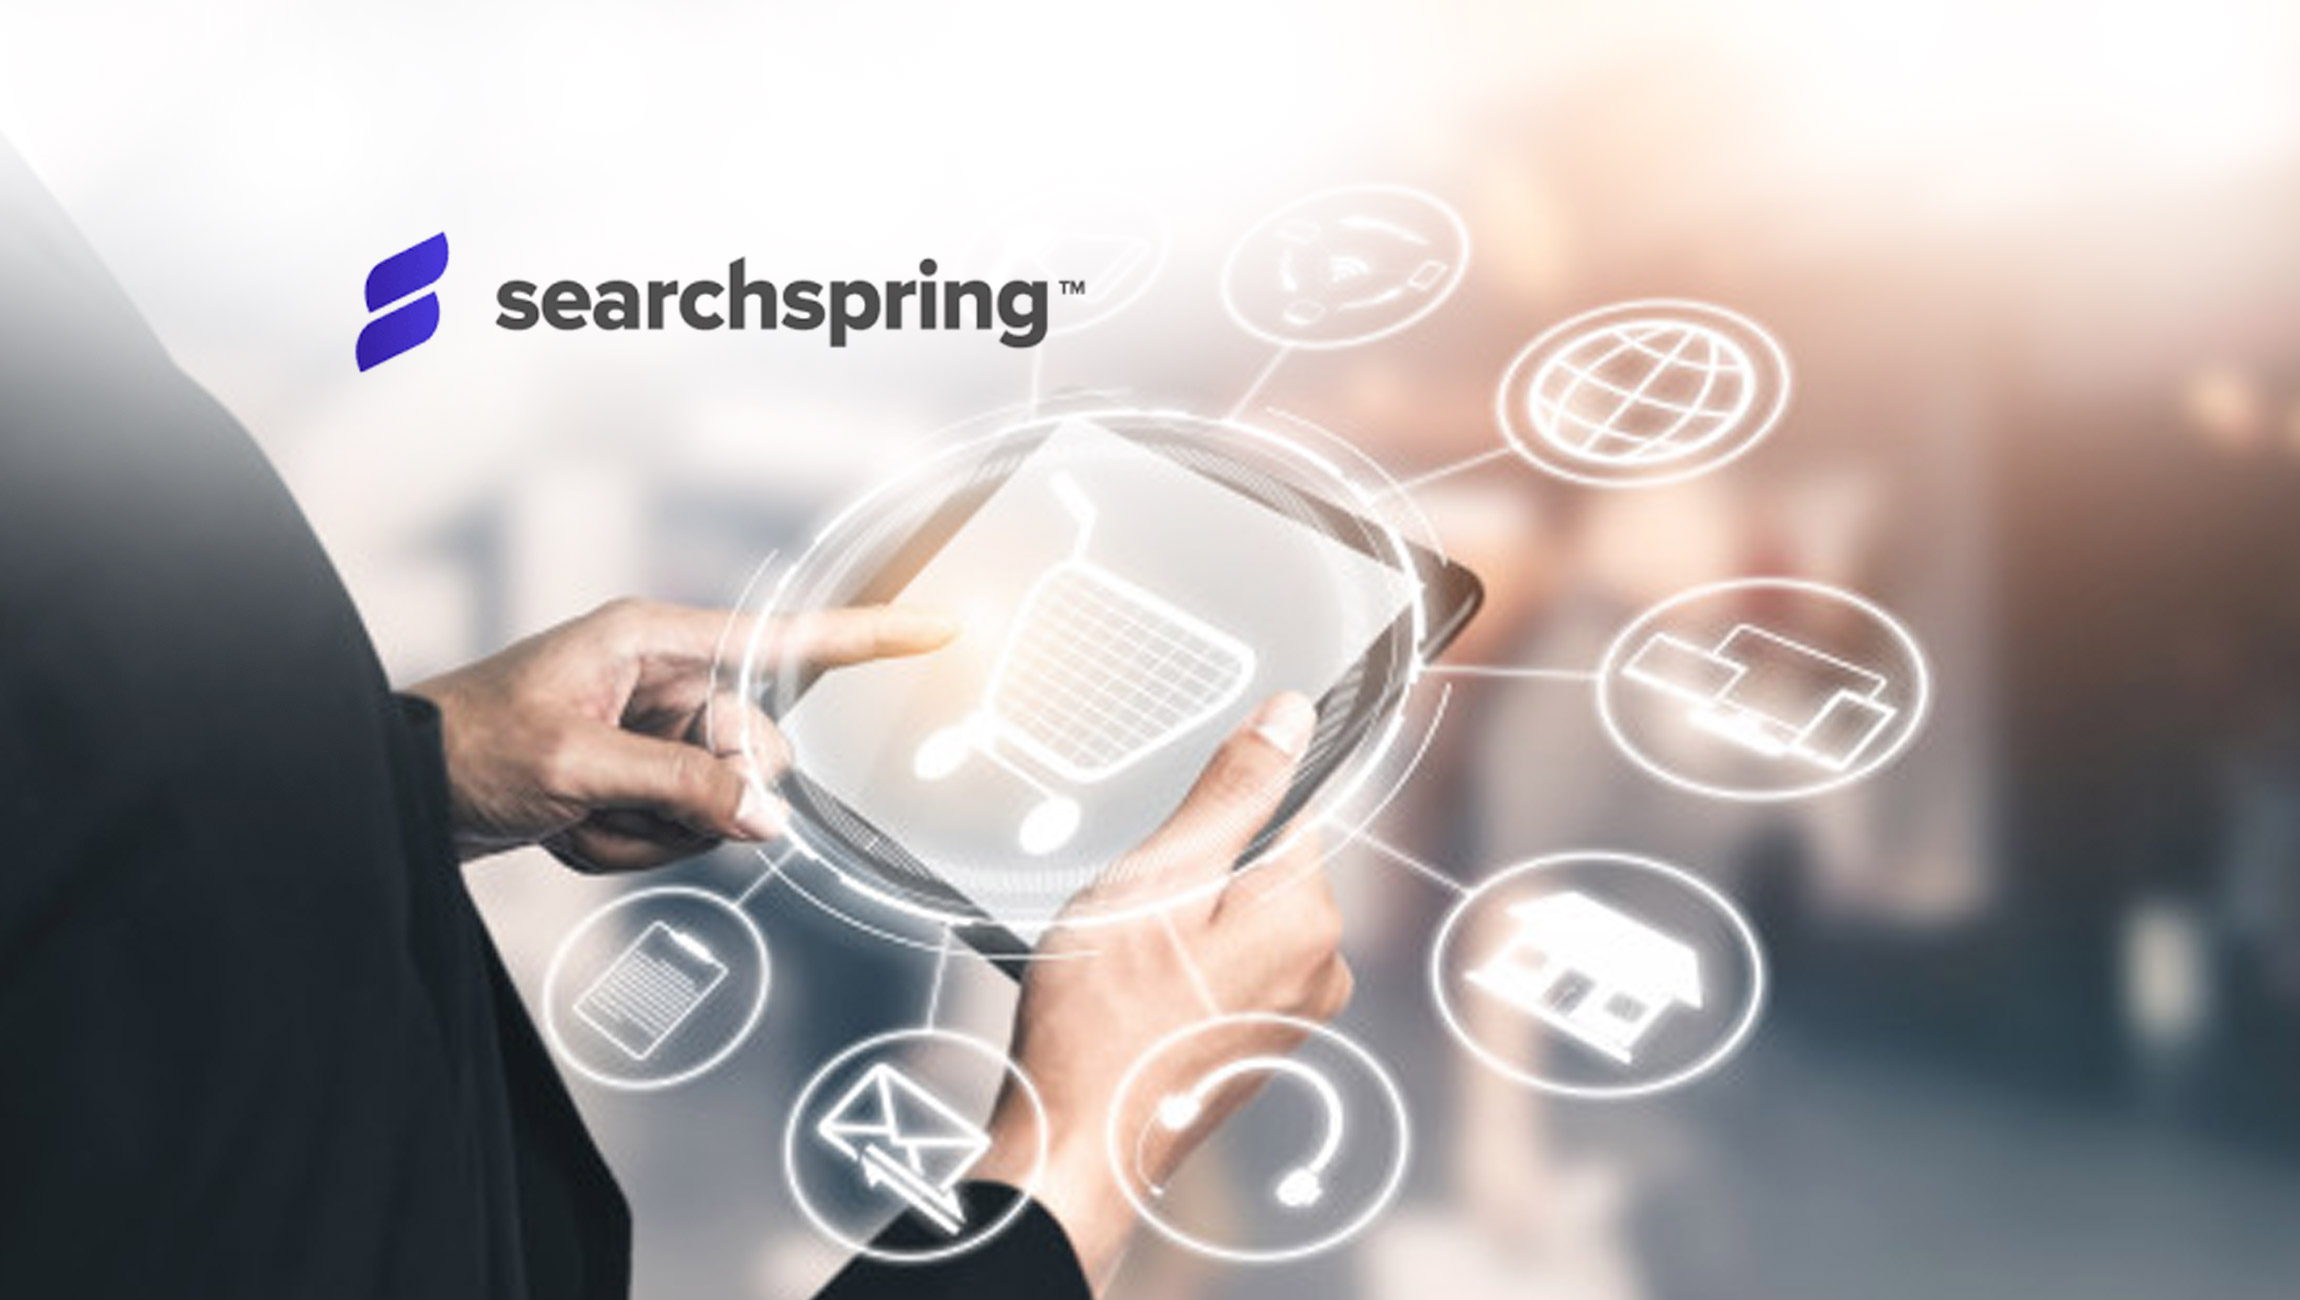 After Accelerated Growth and Momentum in 2022, Searchspring Solidifies Its Position As the Ultimate Shopper Experience Platform